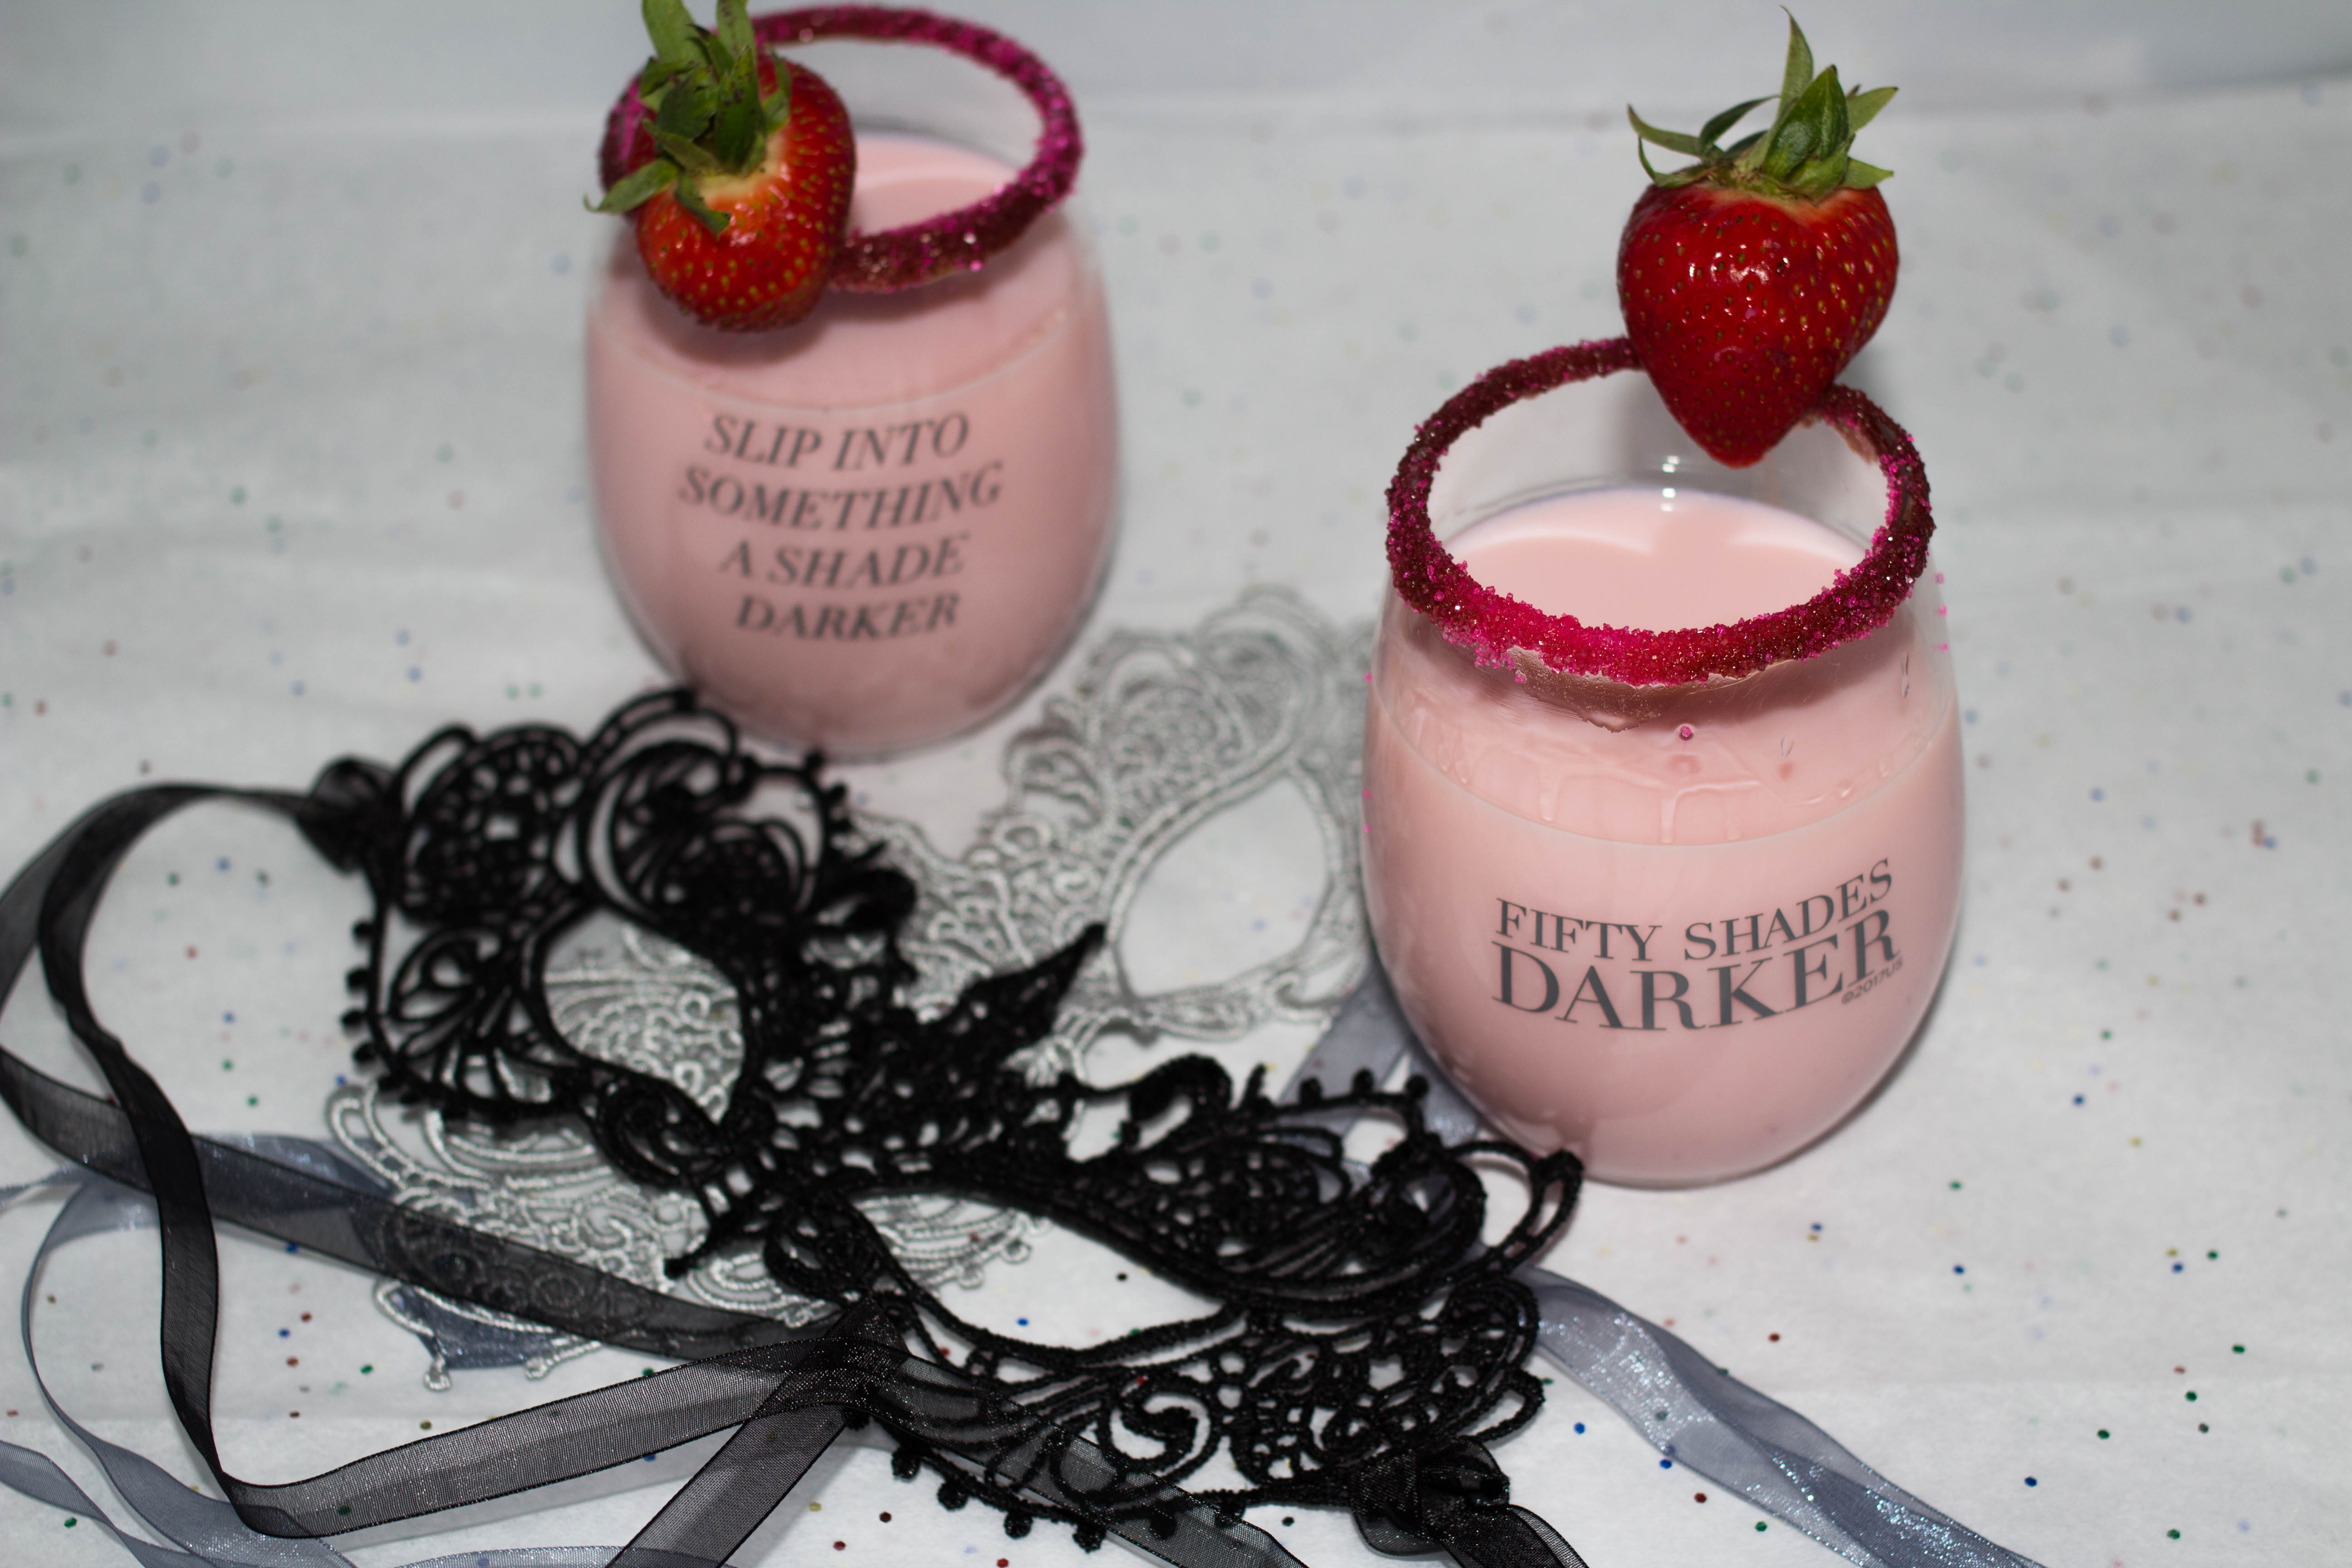 Indulge in a chocolate covered strawberry martini on your next girls night in. Get the girls together, watch Fifty Shades Darker and enjoy this sweet cocktail